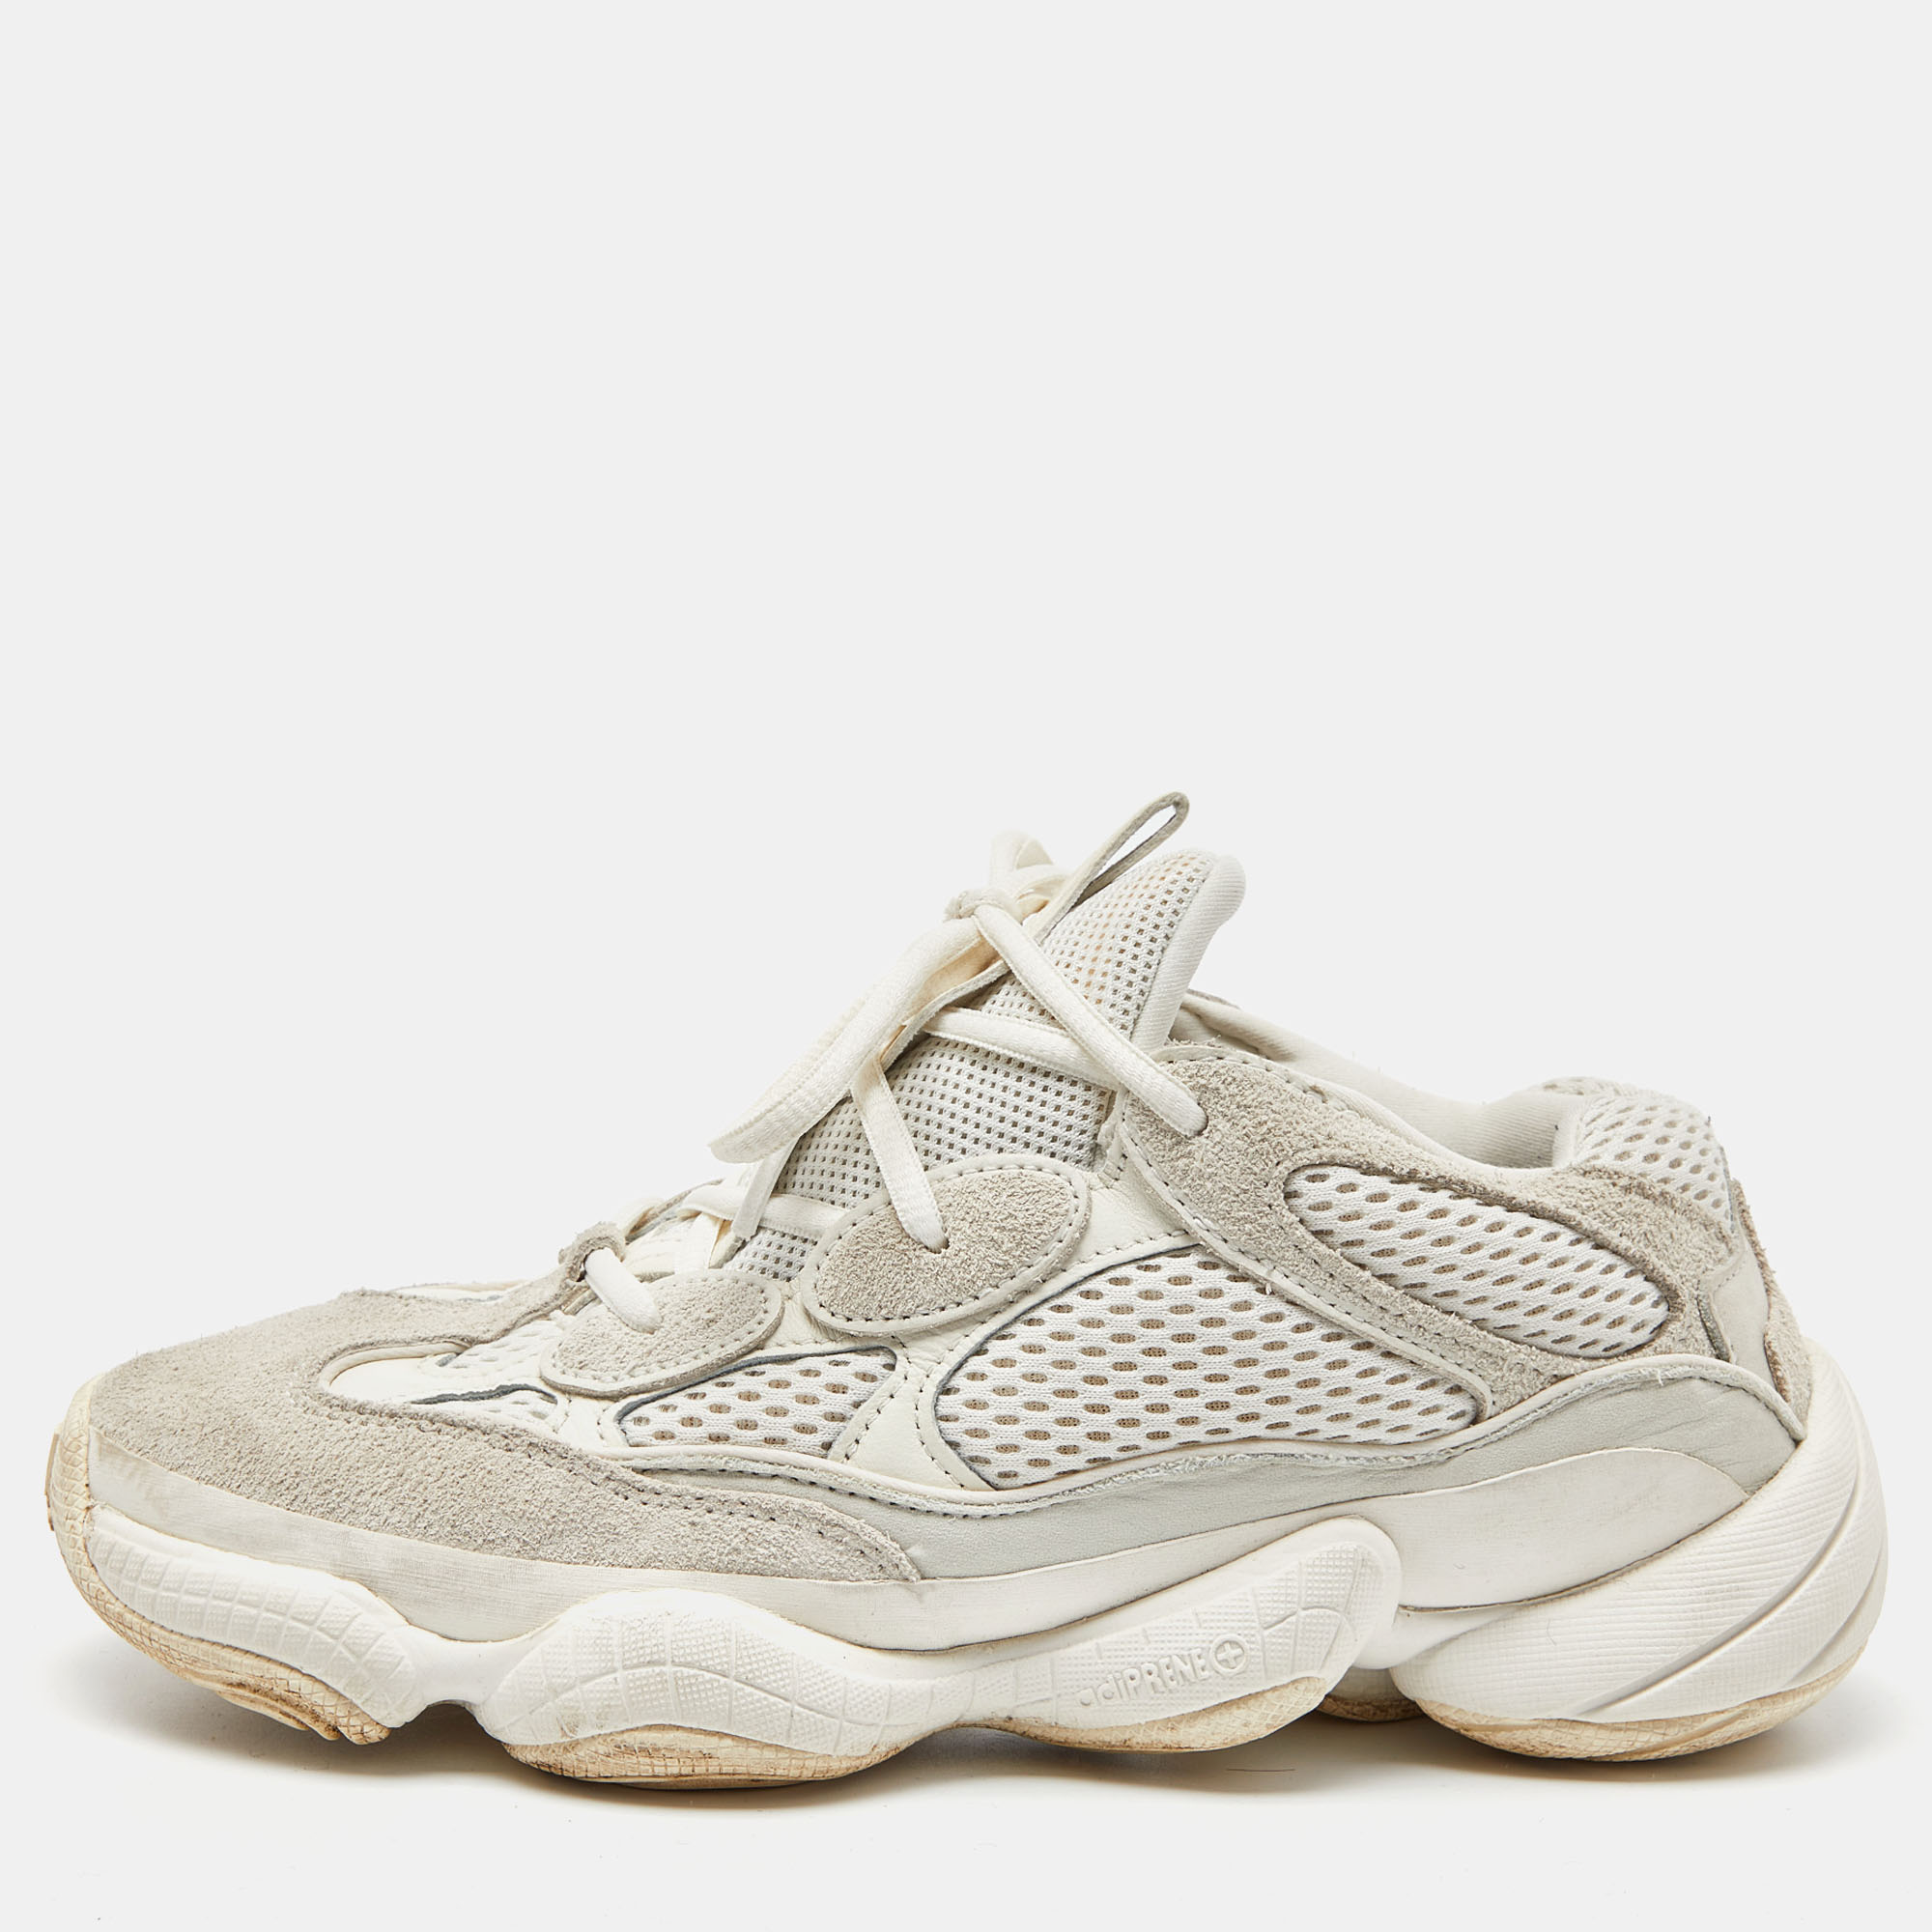 The Yeezy x adidas Yeezy 500 sneakers combine premium materials to create a stylish and comfortable footwear option. The shoe features a sleek white suede upper with mesh accents while the distinctive chunky sole offers excellent support and cushioning for everyday wear with a touch of urban flair.